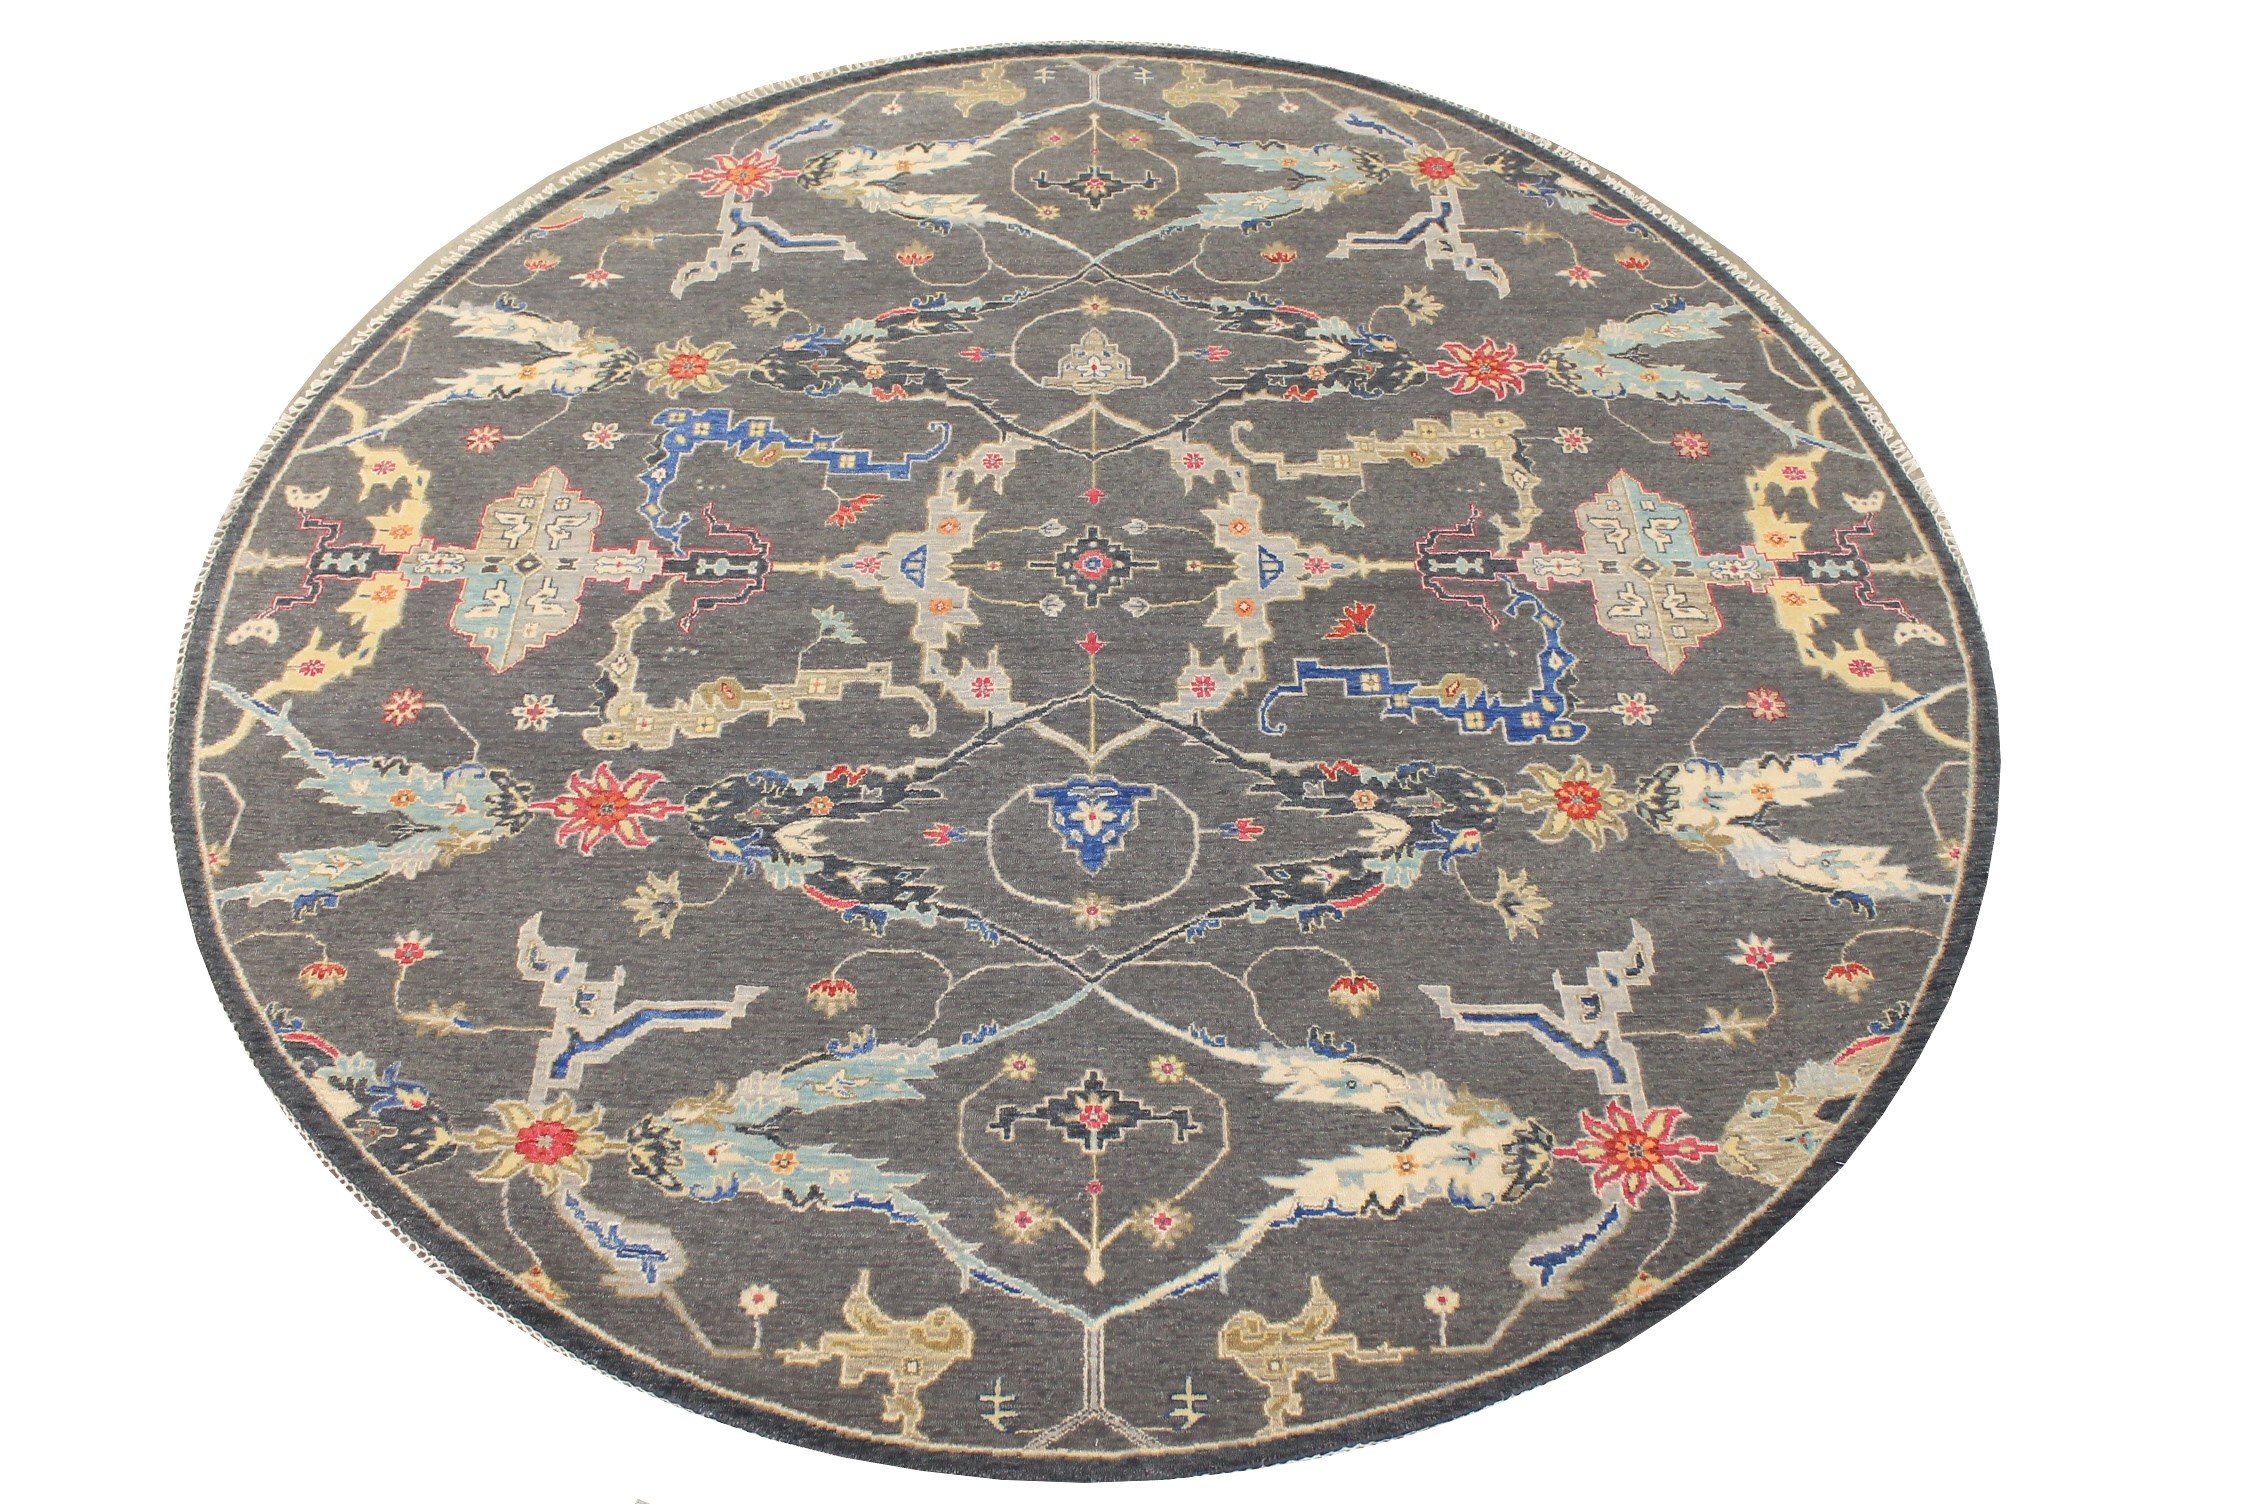 8 ft. Round & Square Traditional Hand Knotted Wool Area Rug - MR027043